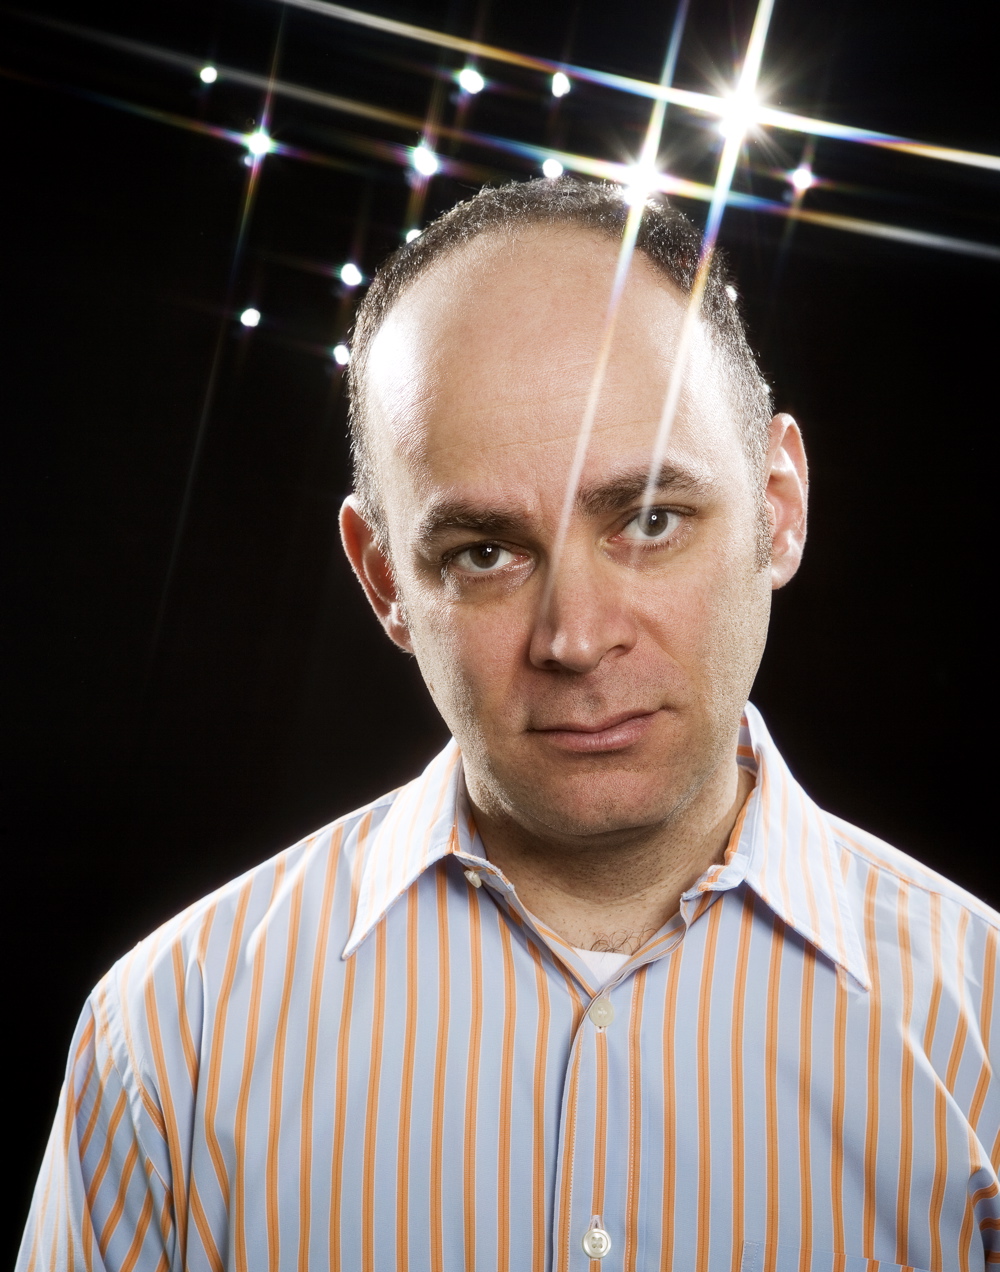 click to close - todd-barry-2